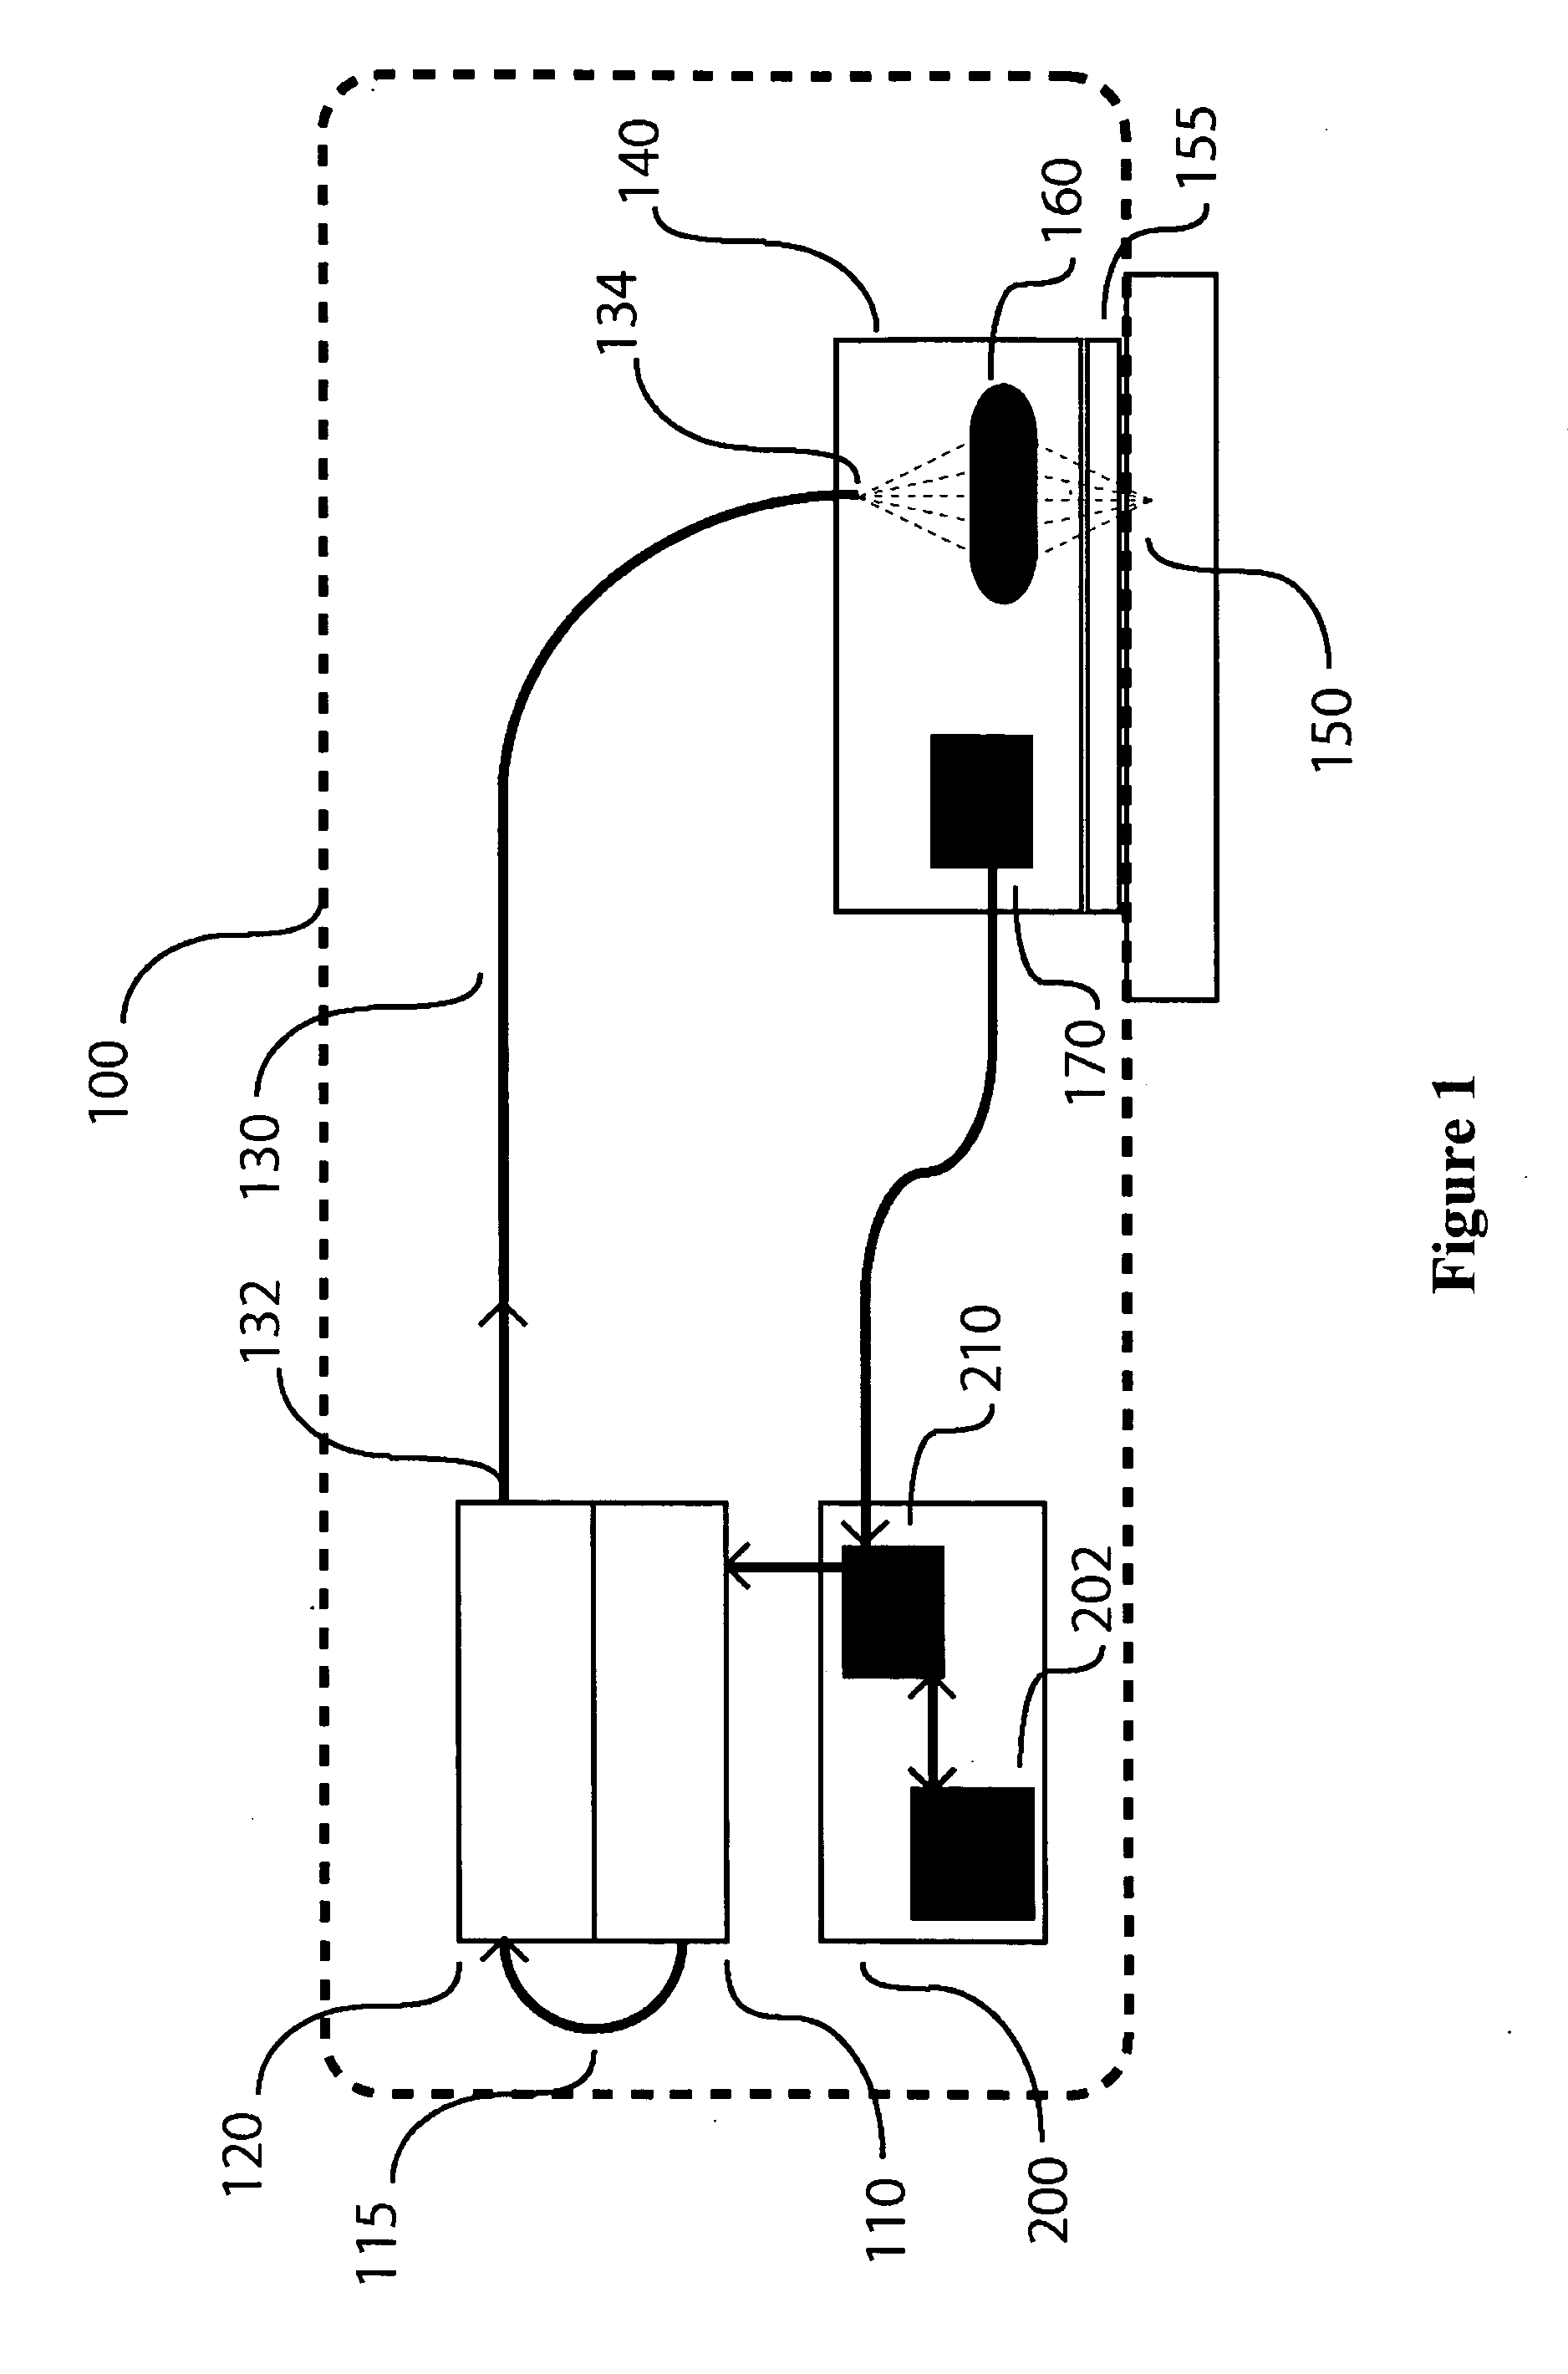 Method and apparatus for monitoring and controlling laser-induced tissue treatment